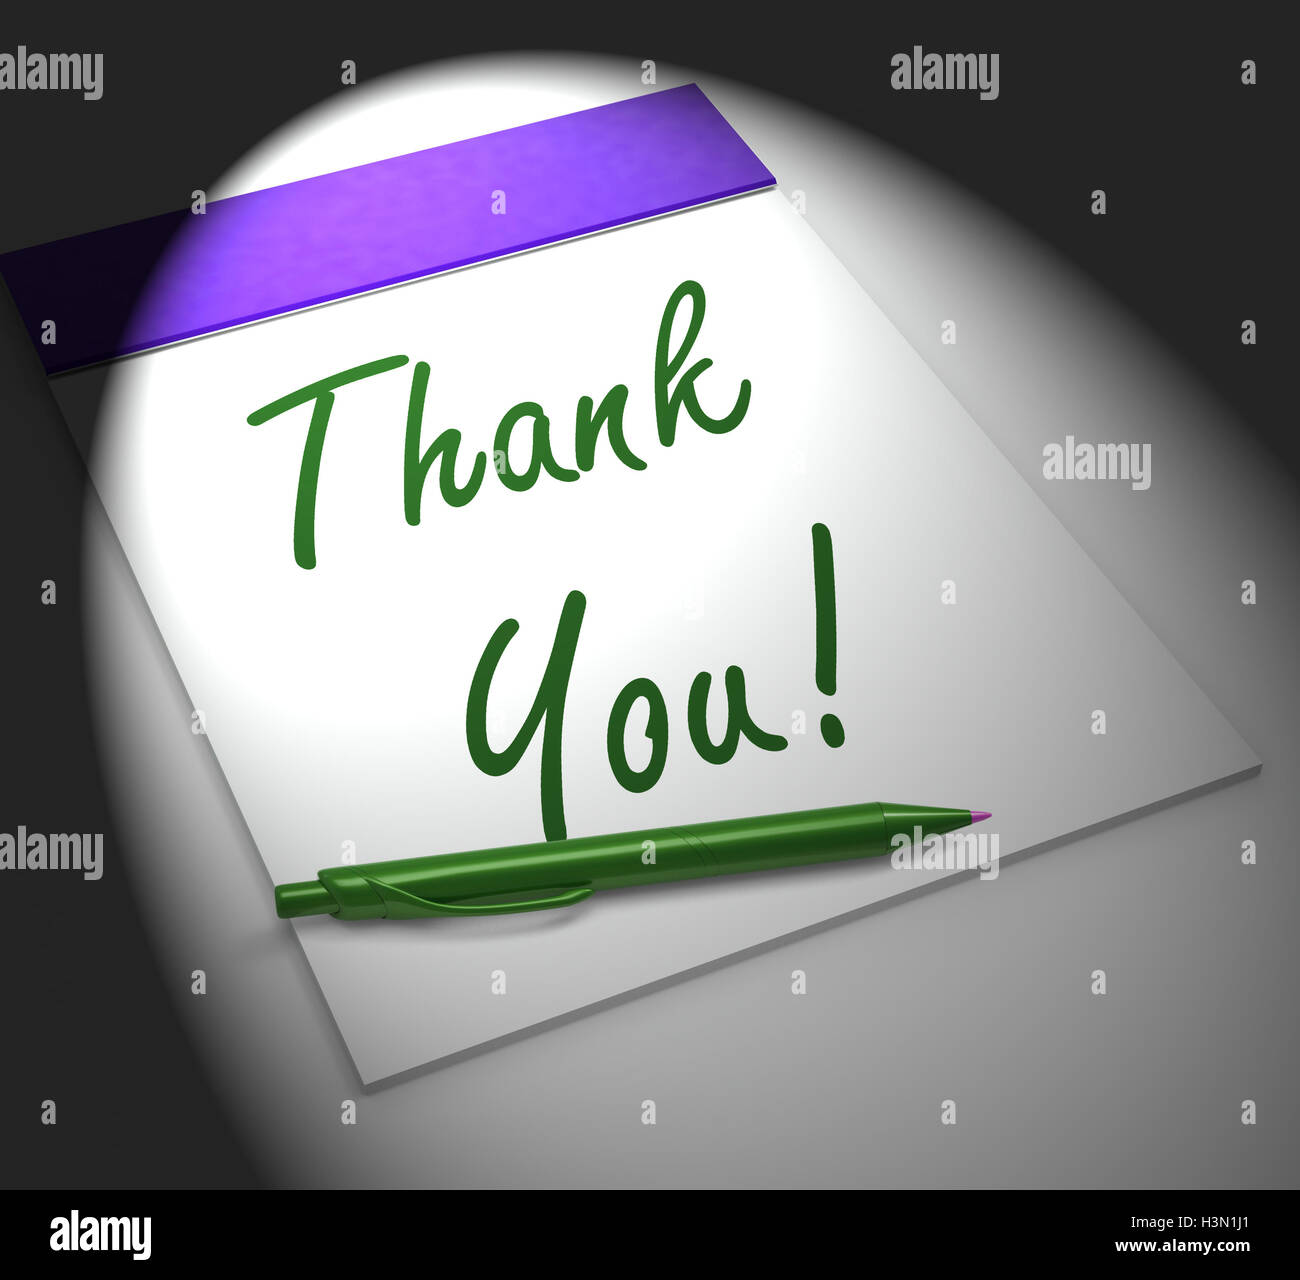 Thank You! Notebook Displays Acknowledgment Or Gratefulness Stock Photo